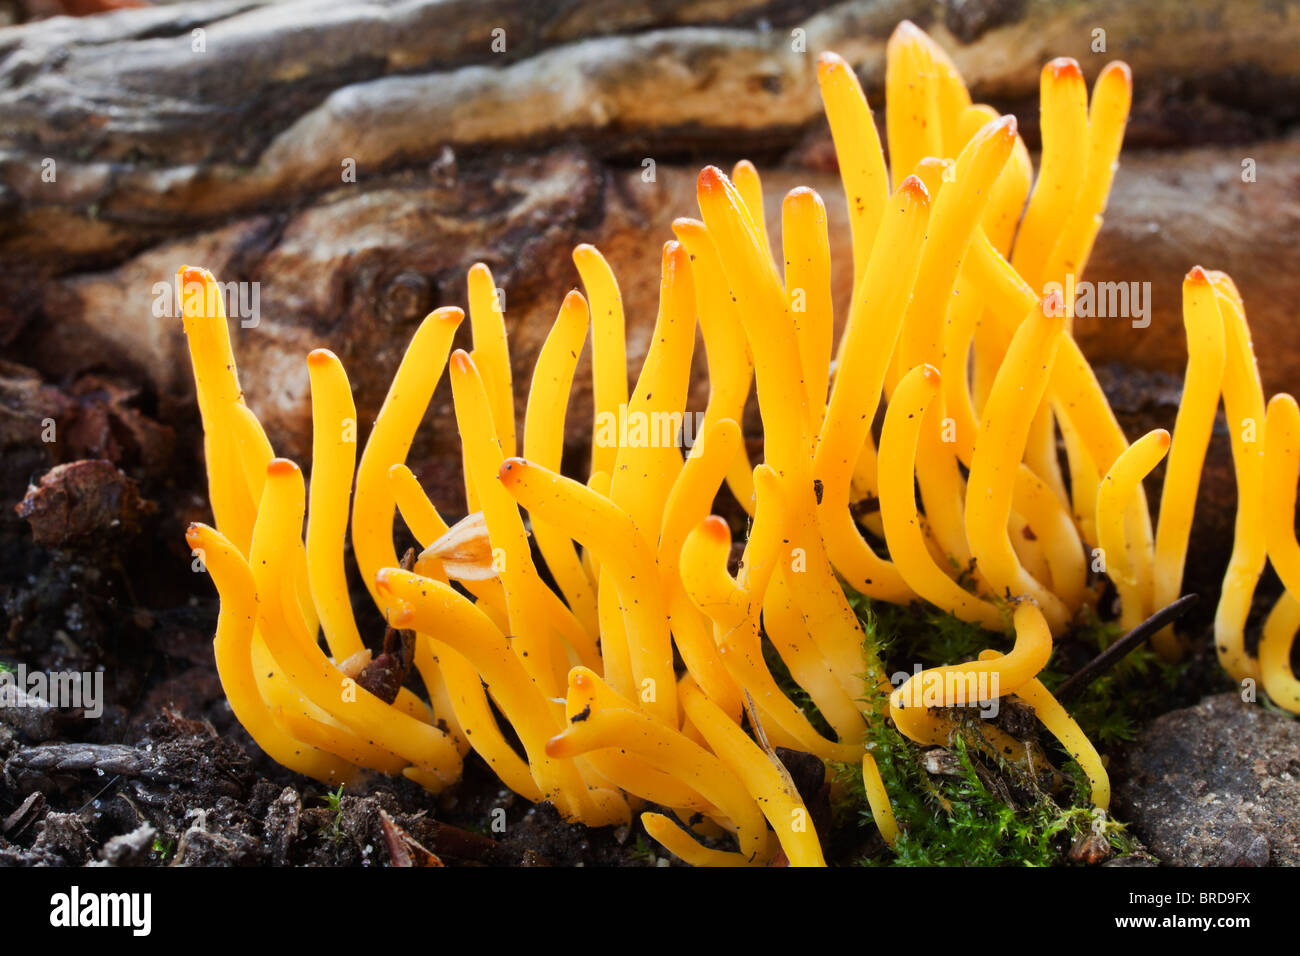 Stagshorn or jelly antler fungus. Stock Photo